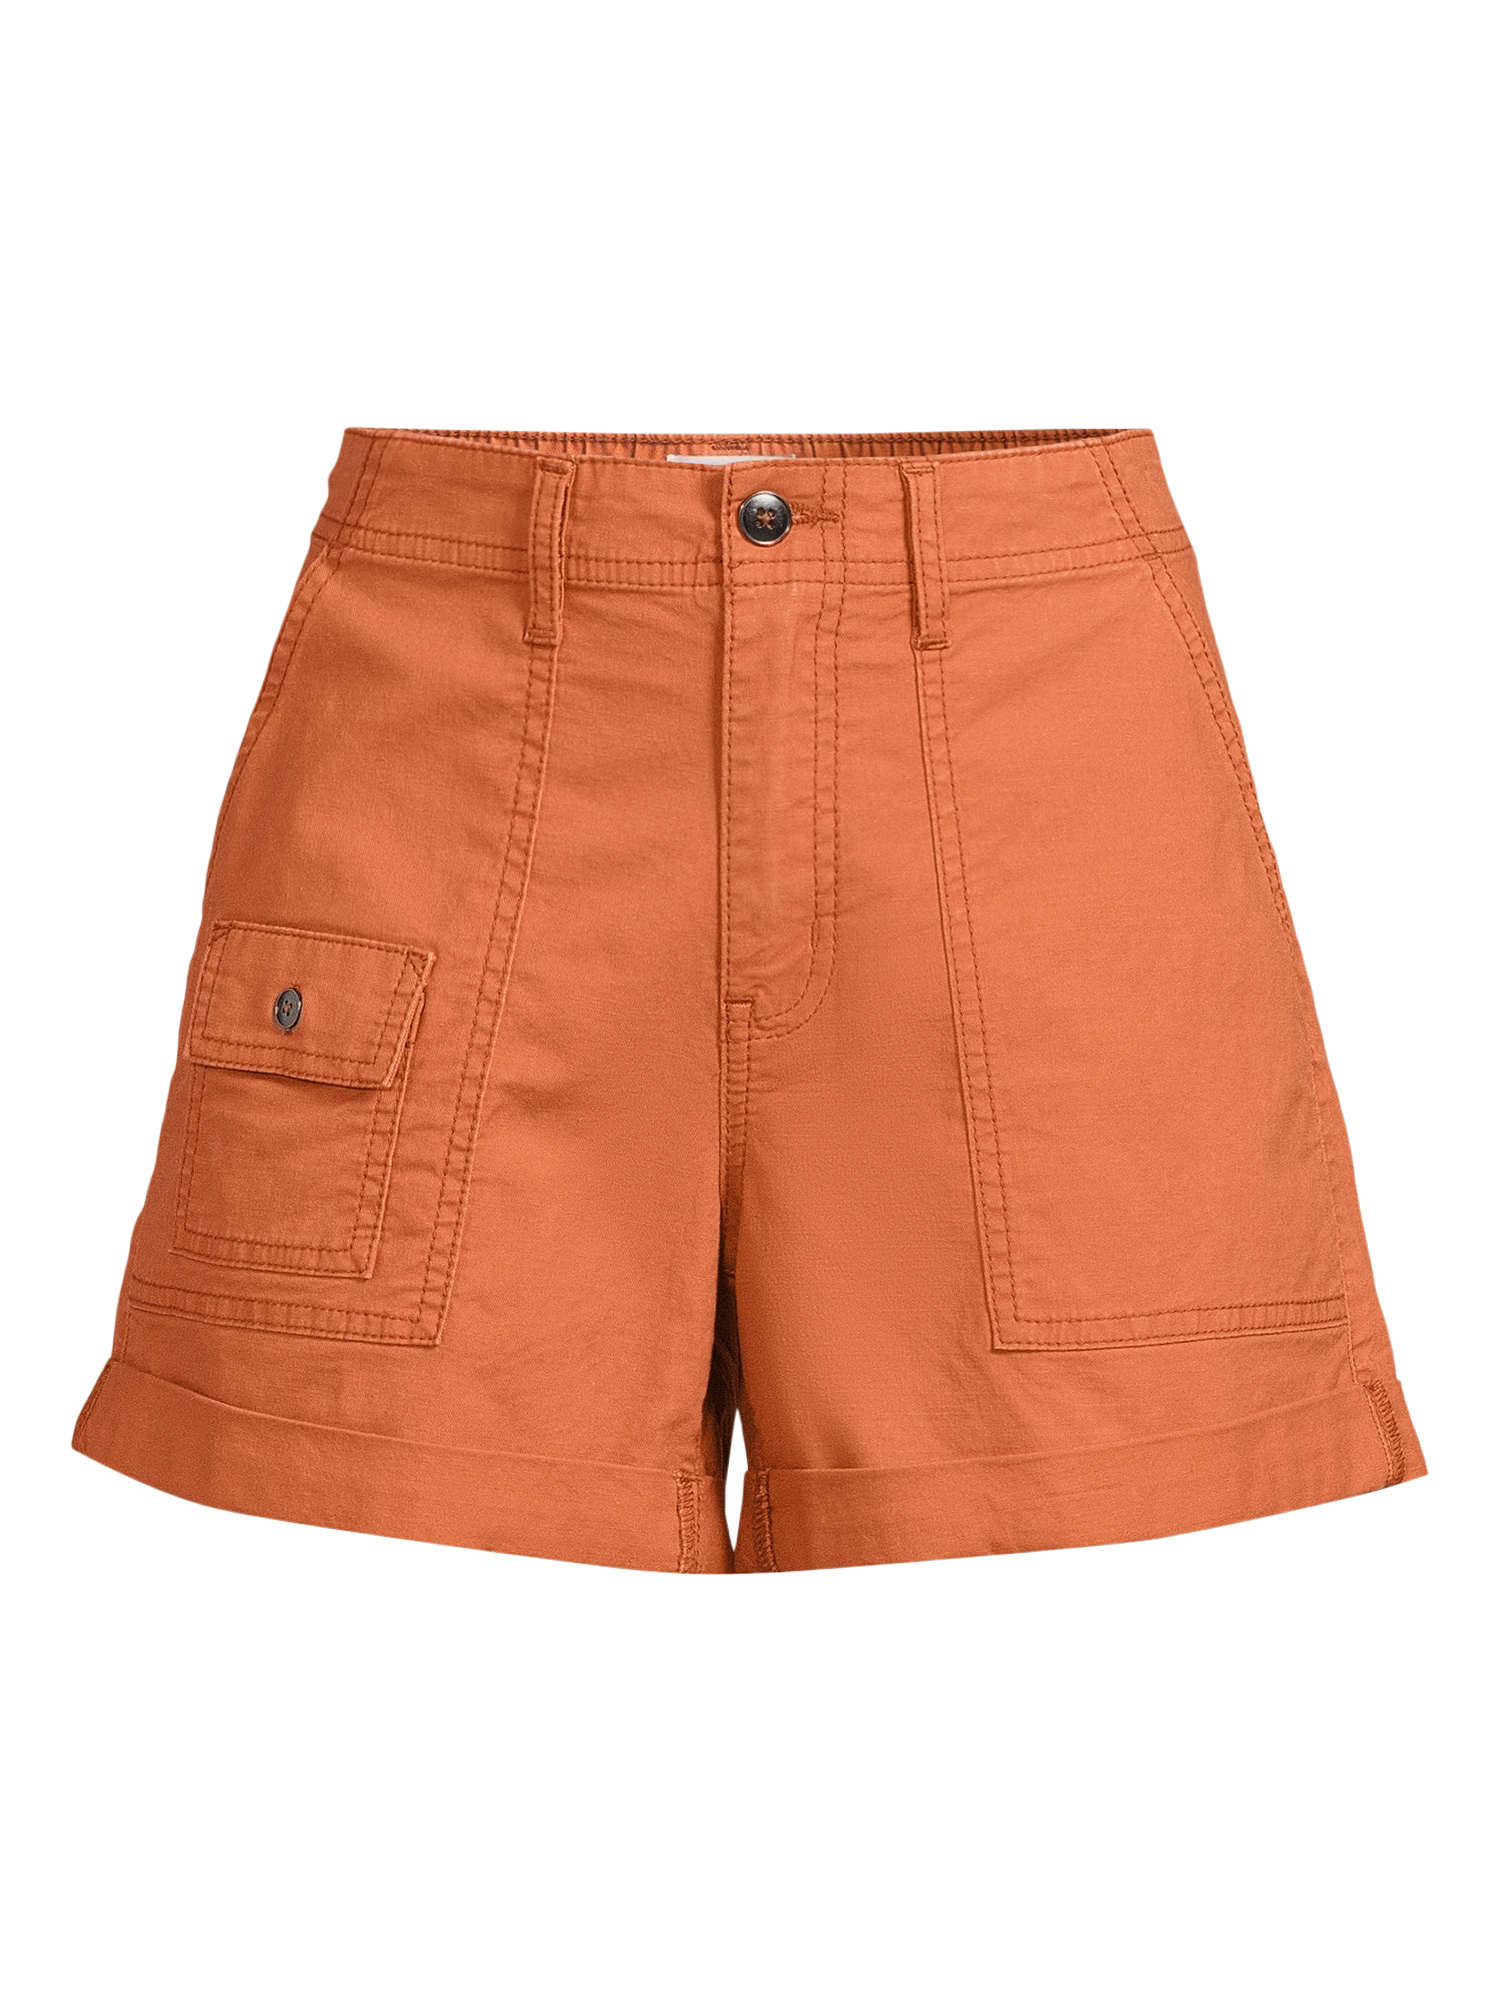 Time and Tru Women's and Women's Plus Utility Cuff Shorts, 4" Inseam, Sizes 2-20 - image 5 of 5